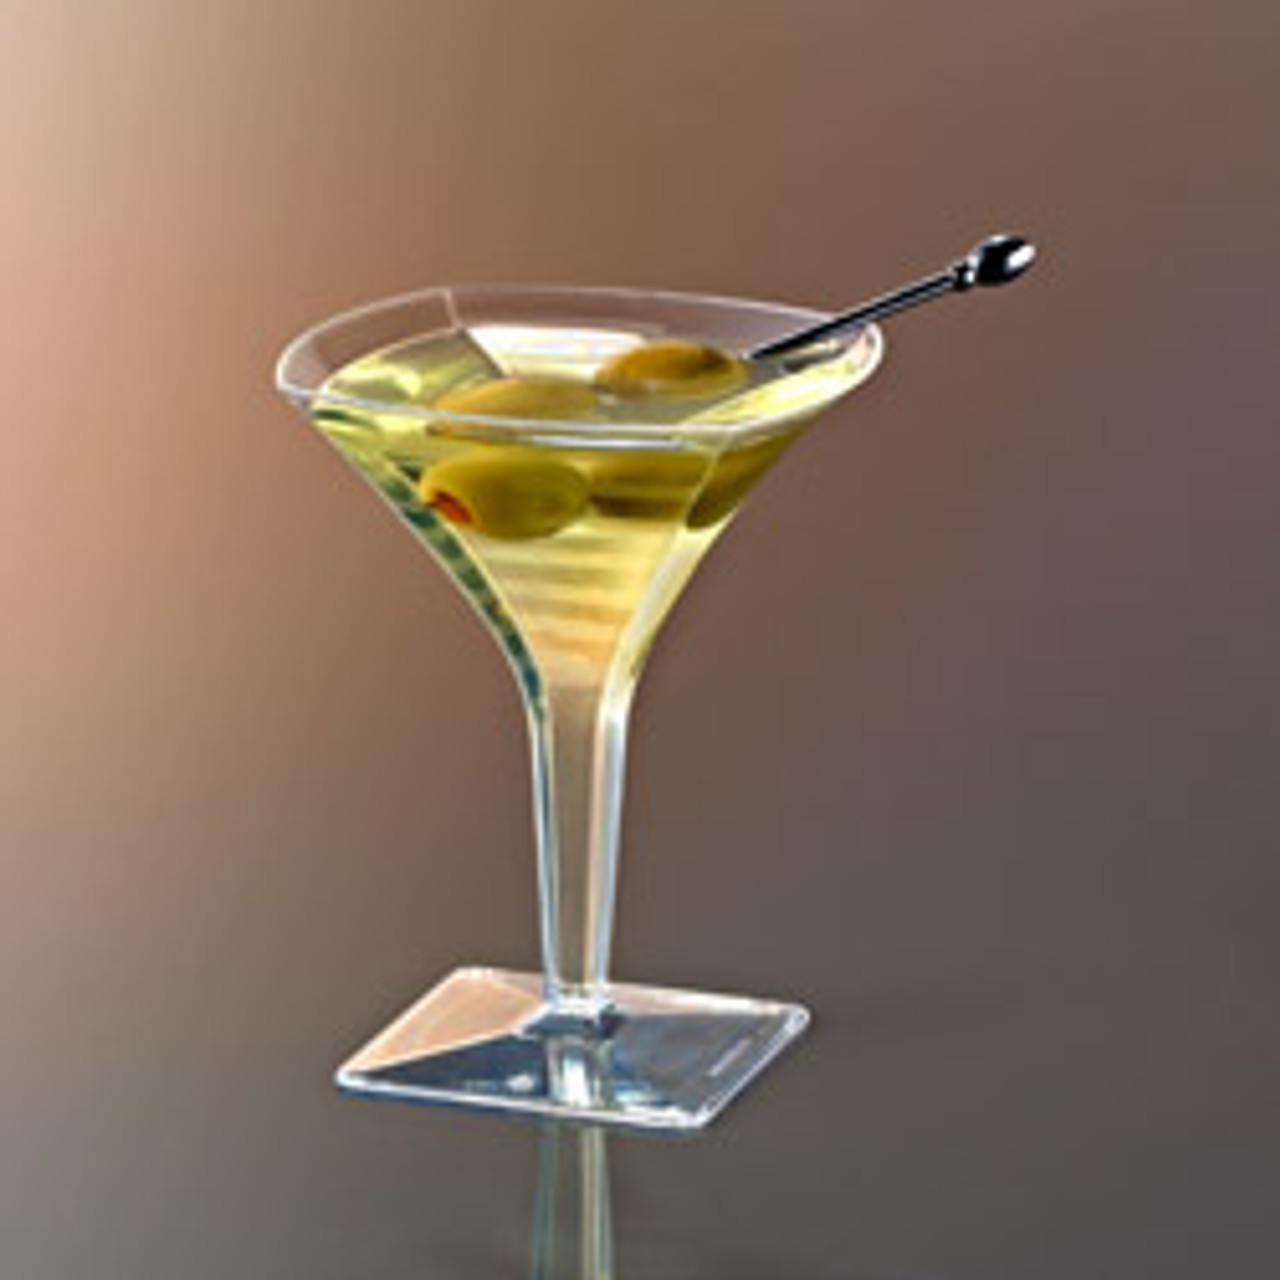 https://cdn11.bigcommerce.com/s-hgqmwywp99/images/stencil/1280x1280/products/49028/43819/2-oz-yoshi-square-plastic-mini-martini-glasses-8-ct-15__90397.1675880293.jpg?c=1?imbypass=on